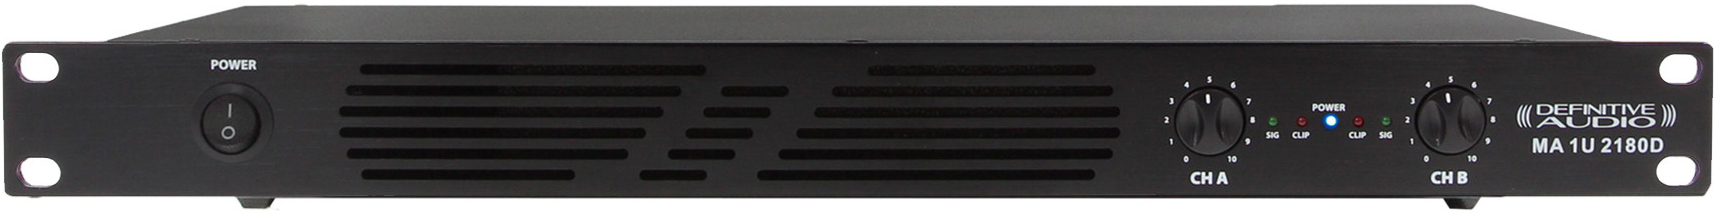 Definitive Audio Ma 1u 2180d - POWER AMPLIFIER STEREO - Main picture